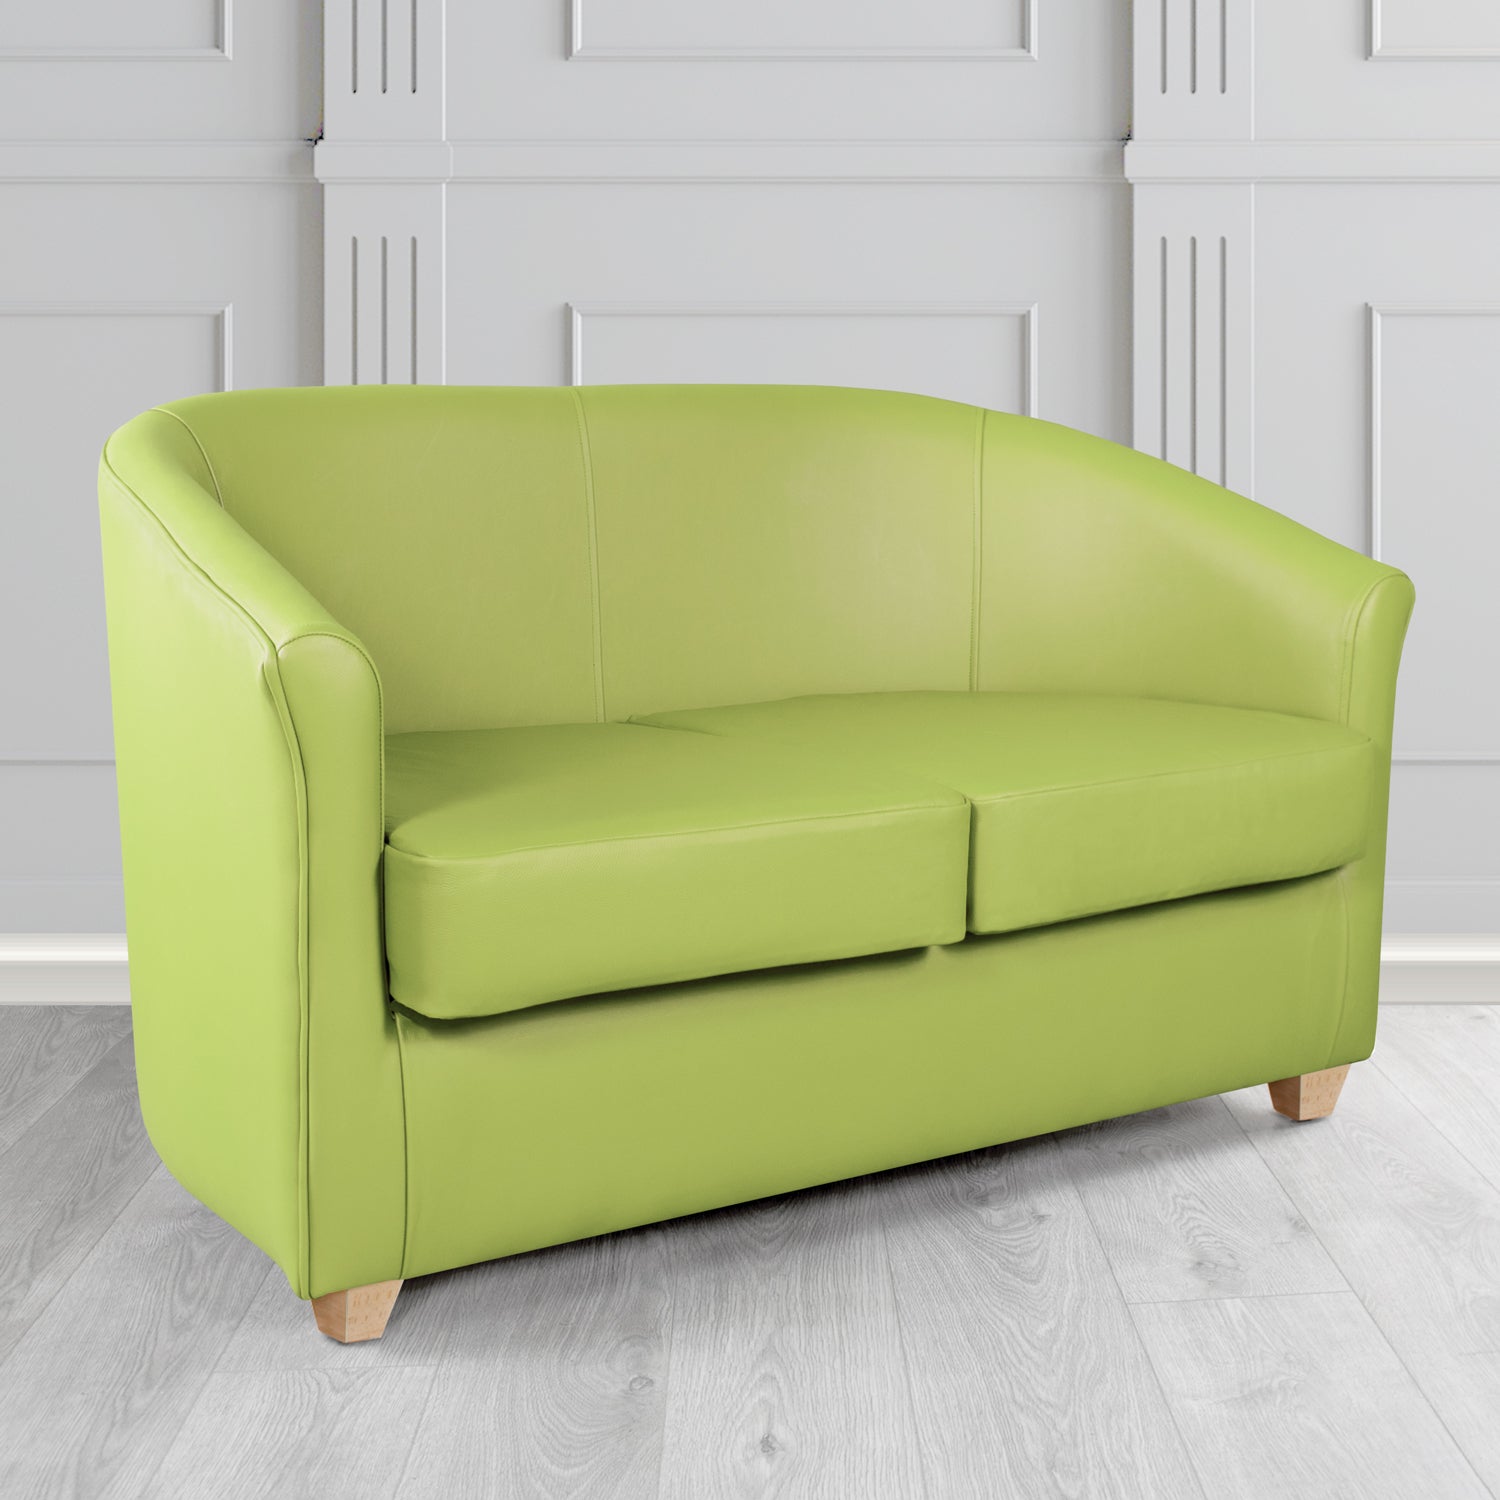 Cannes 2 Seater Tub Sofa in Just Colour Pear Crib 5 Faux Leather - The Tub Chair Shop